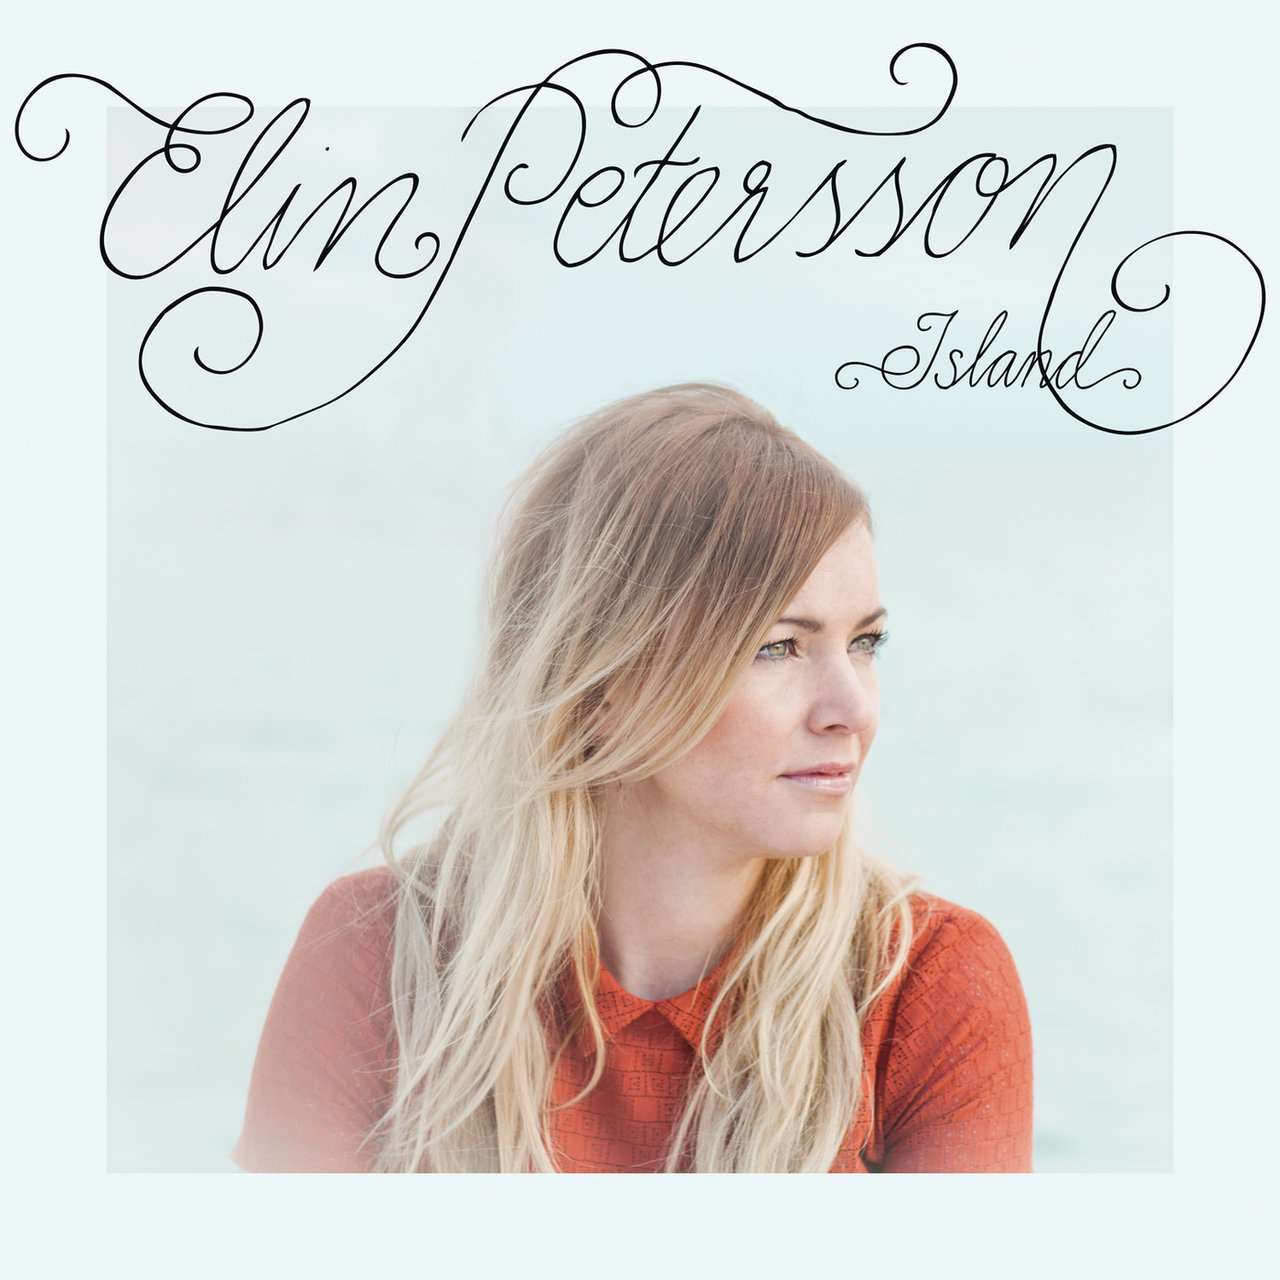 Elin Petersson Island cover artwork